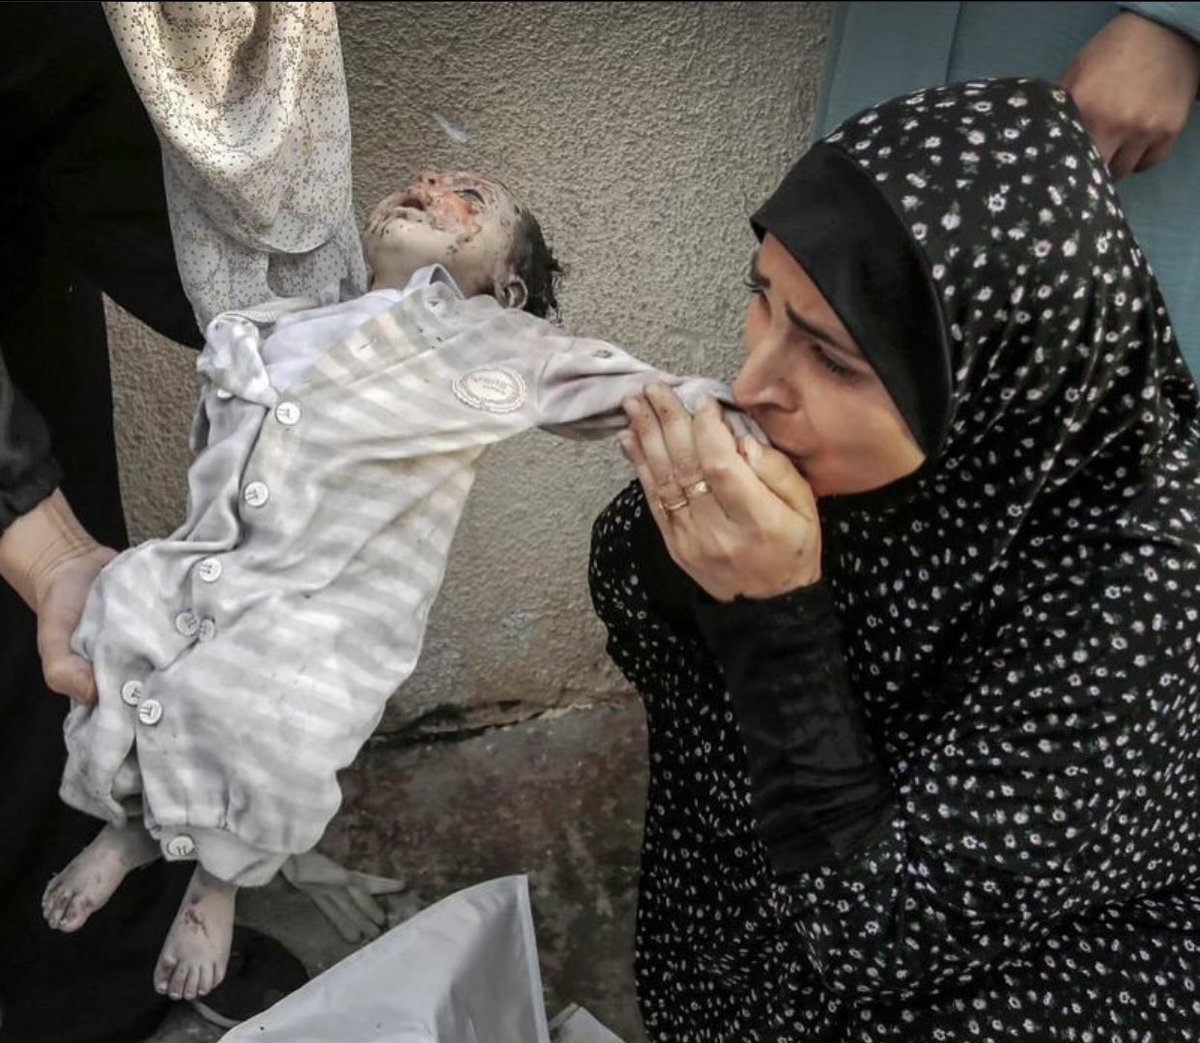 A mother bids farewell to her baby who was killed along with her other children by an Israeli bombardment in Gaza.